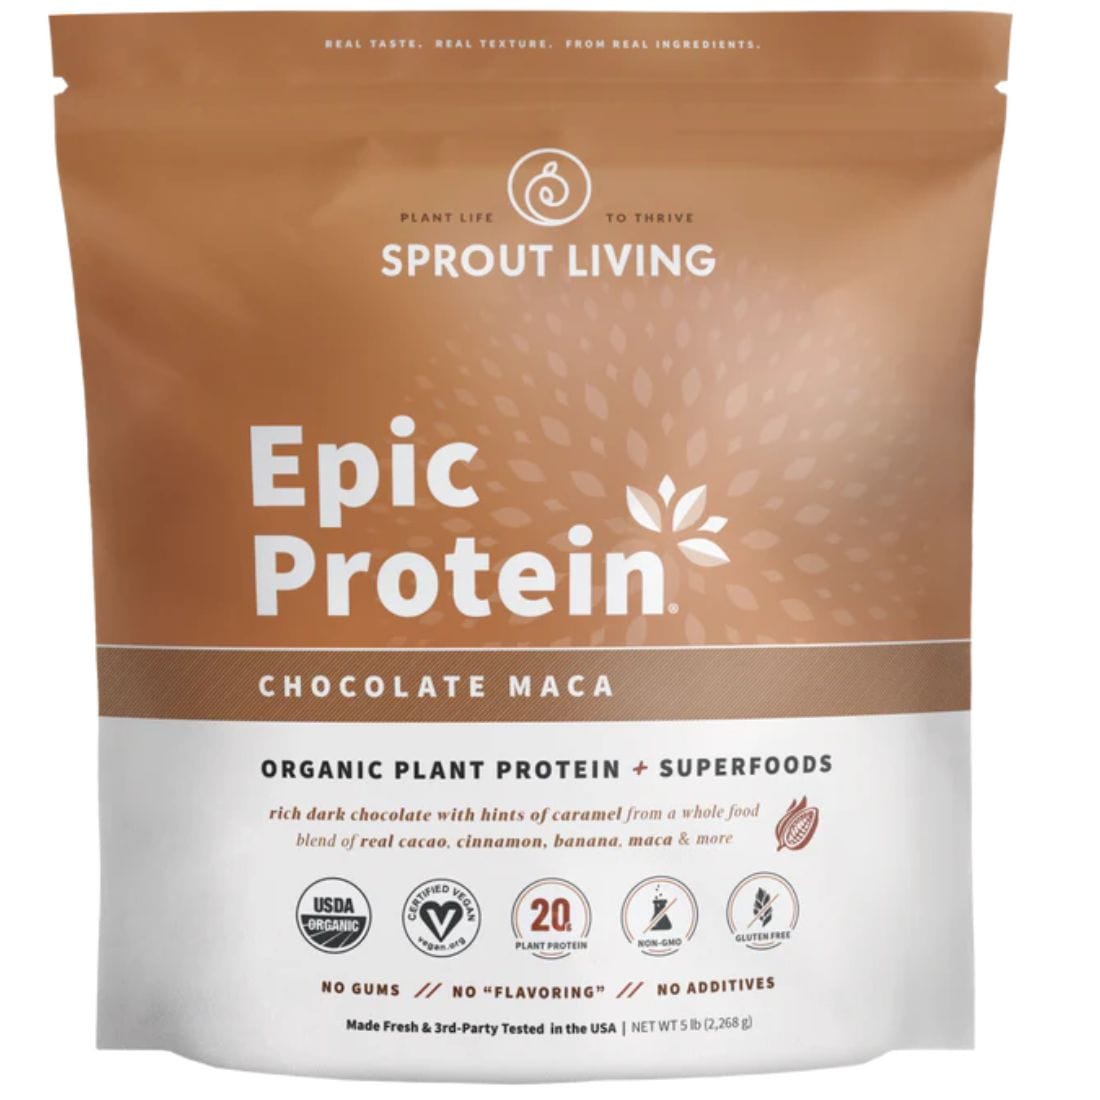 sprout-living-epic-protein-5lbs-bag-chocolate